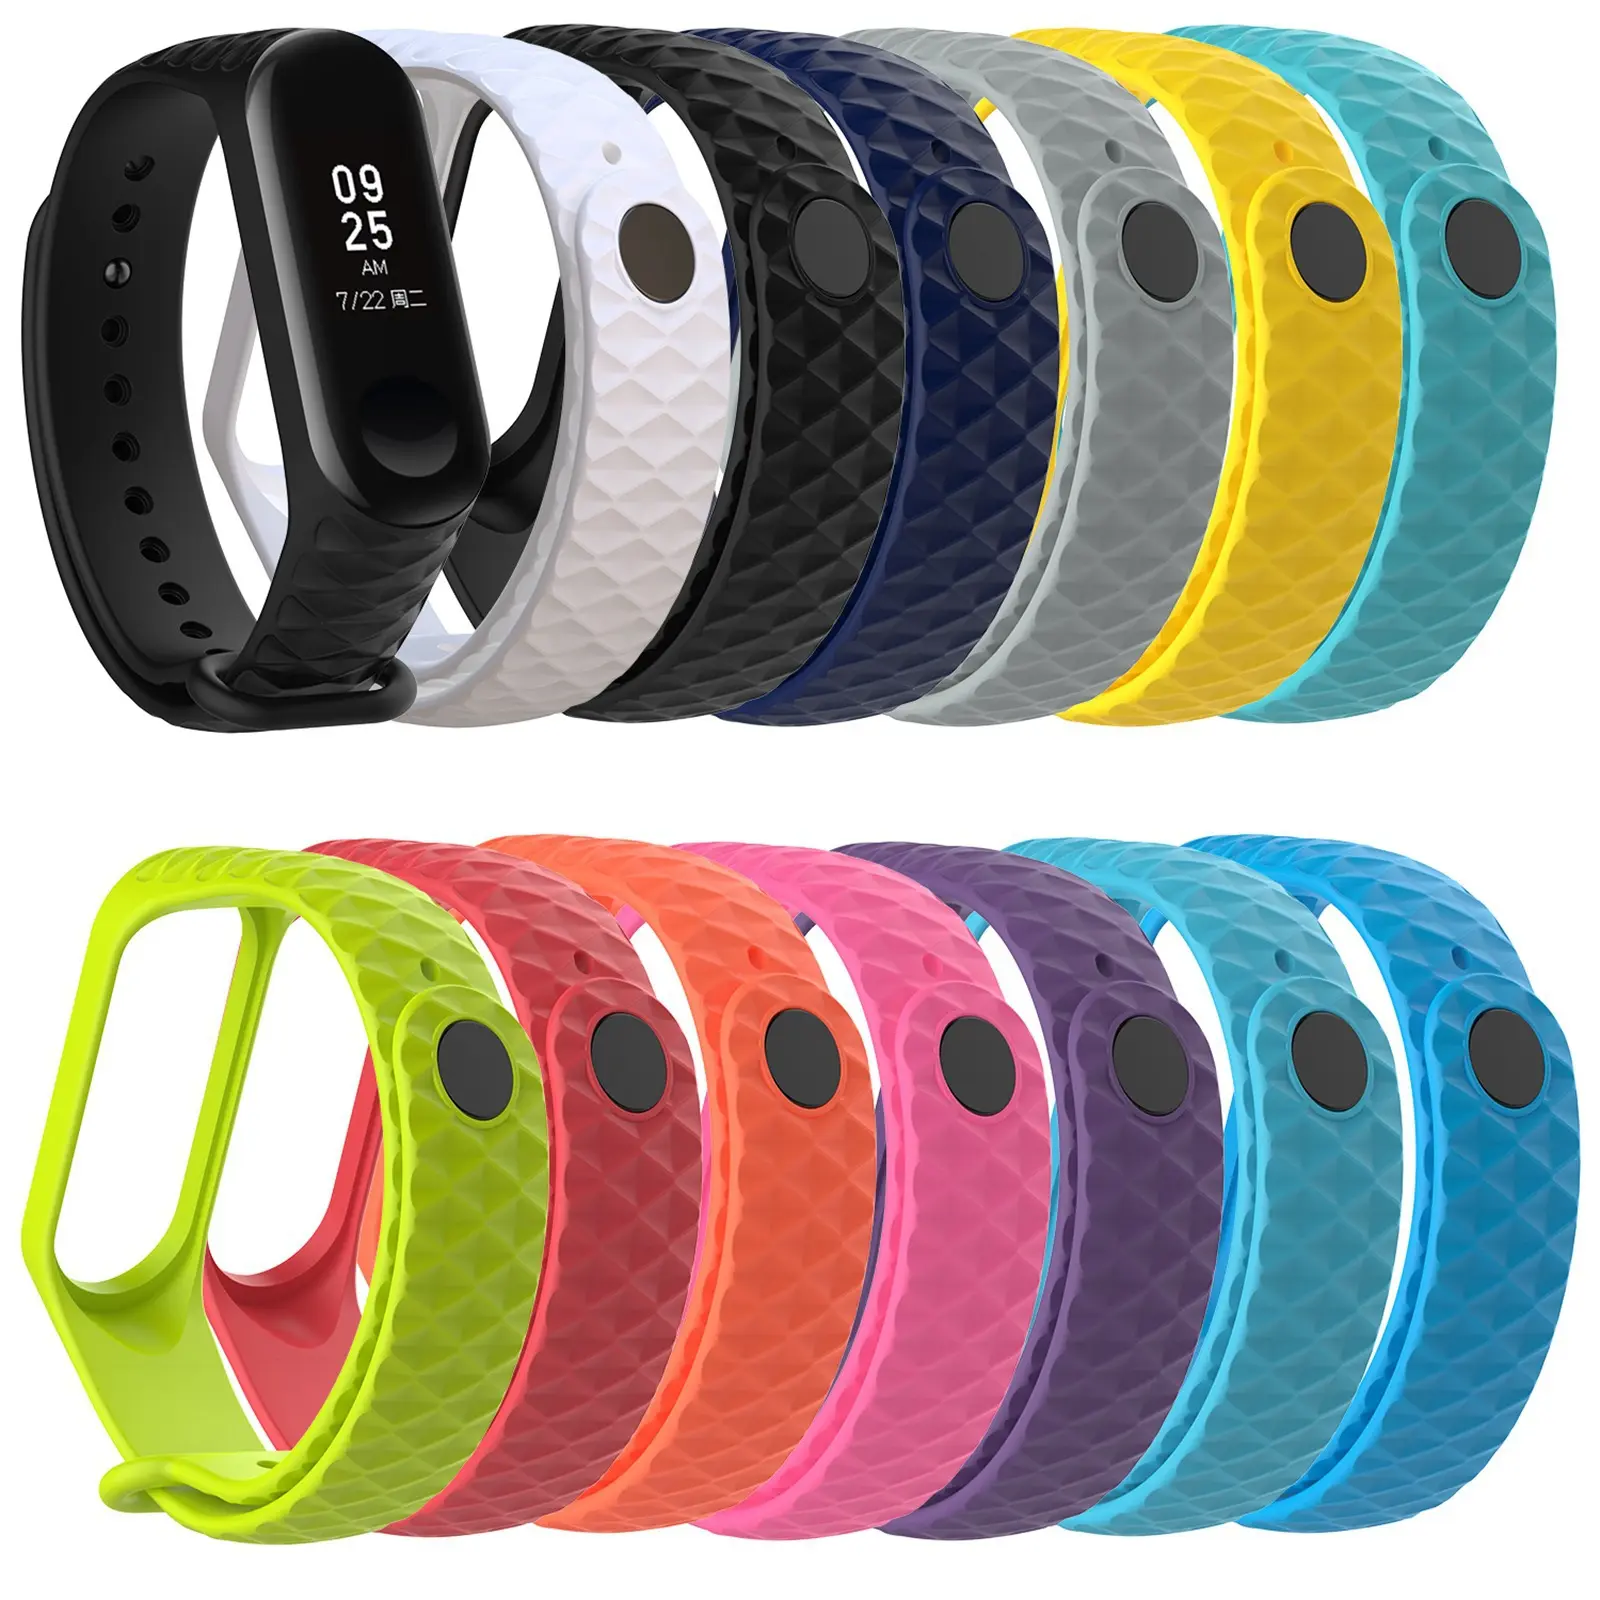 For Xiaomi Mi Band 3 4 Watch Strap Watchband Silicone Wrist Strap For Miband band3 band4 Smartwatch Bracelet